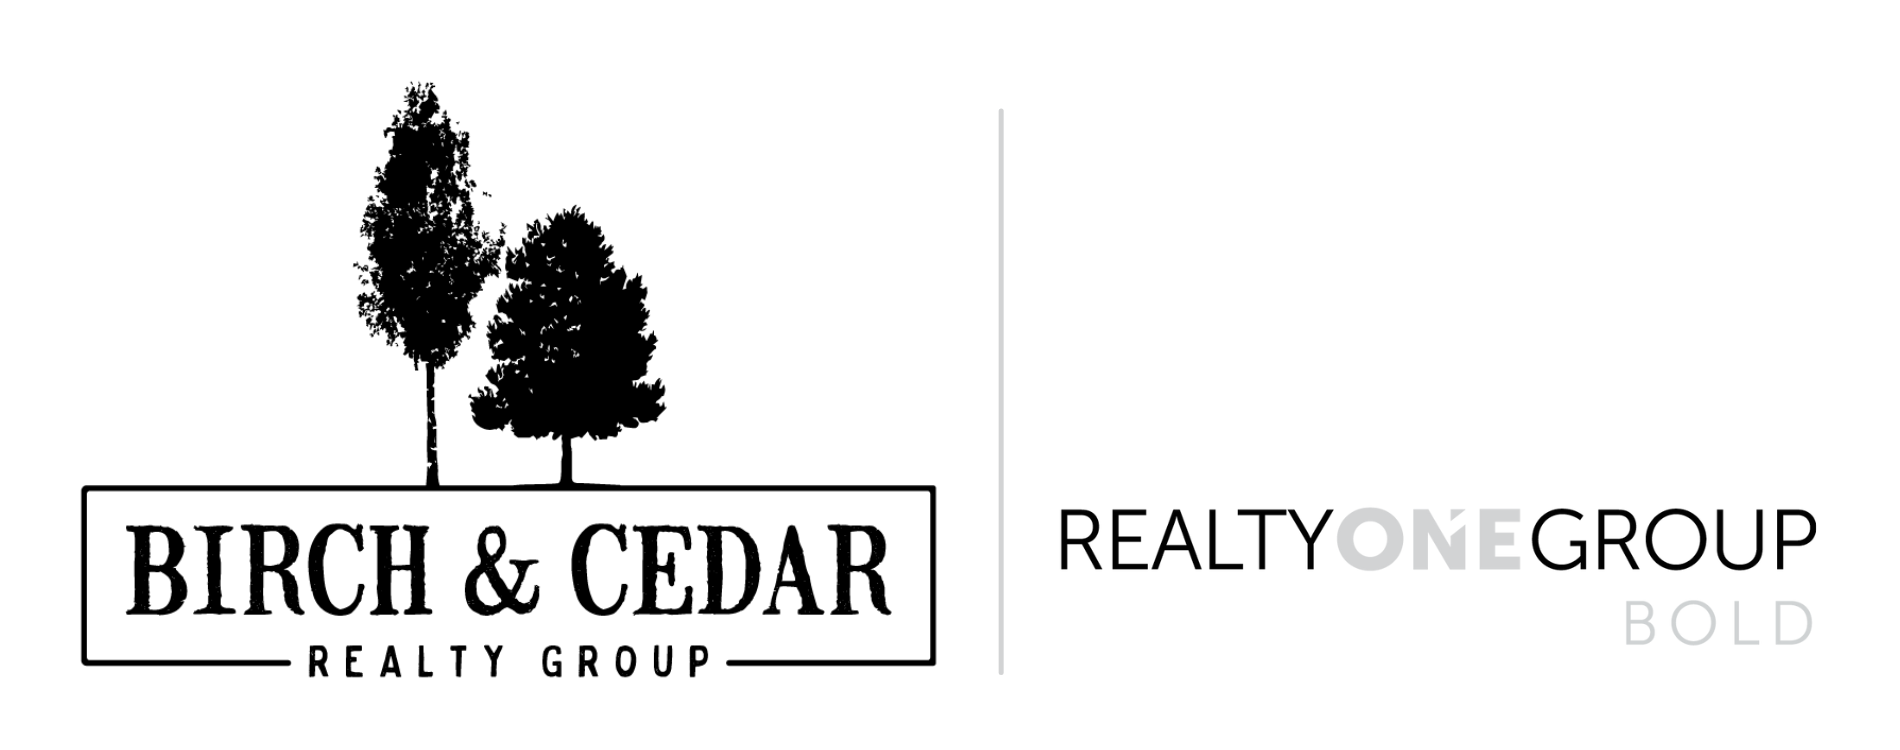 Birch & Cedar Realty Group powered by Realty One Group Bold logo